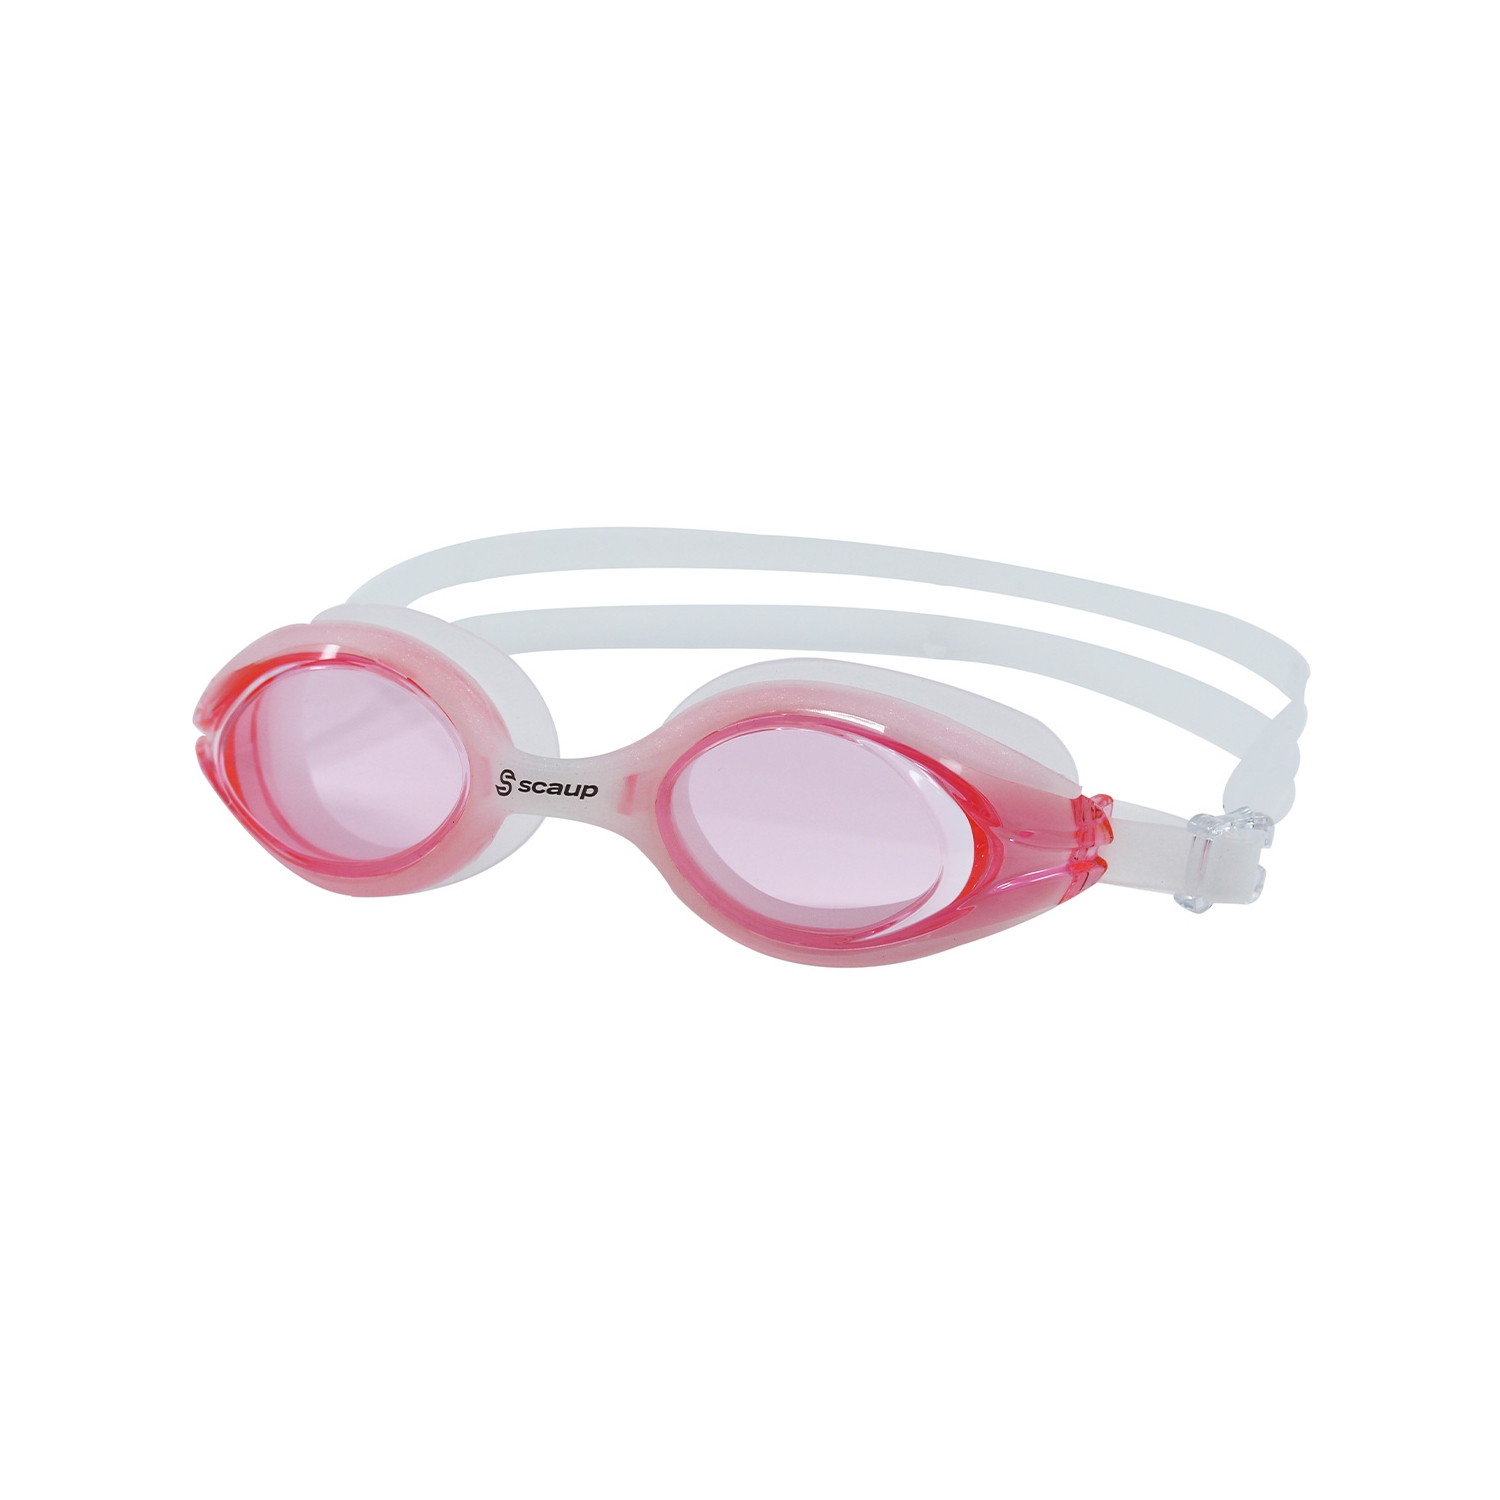 Scaup COMO Leisure Swimming Goggles - Anti-Fog Swim Goggles with UV Protection for Adults, Pink